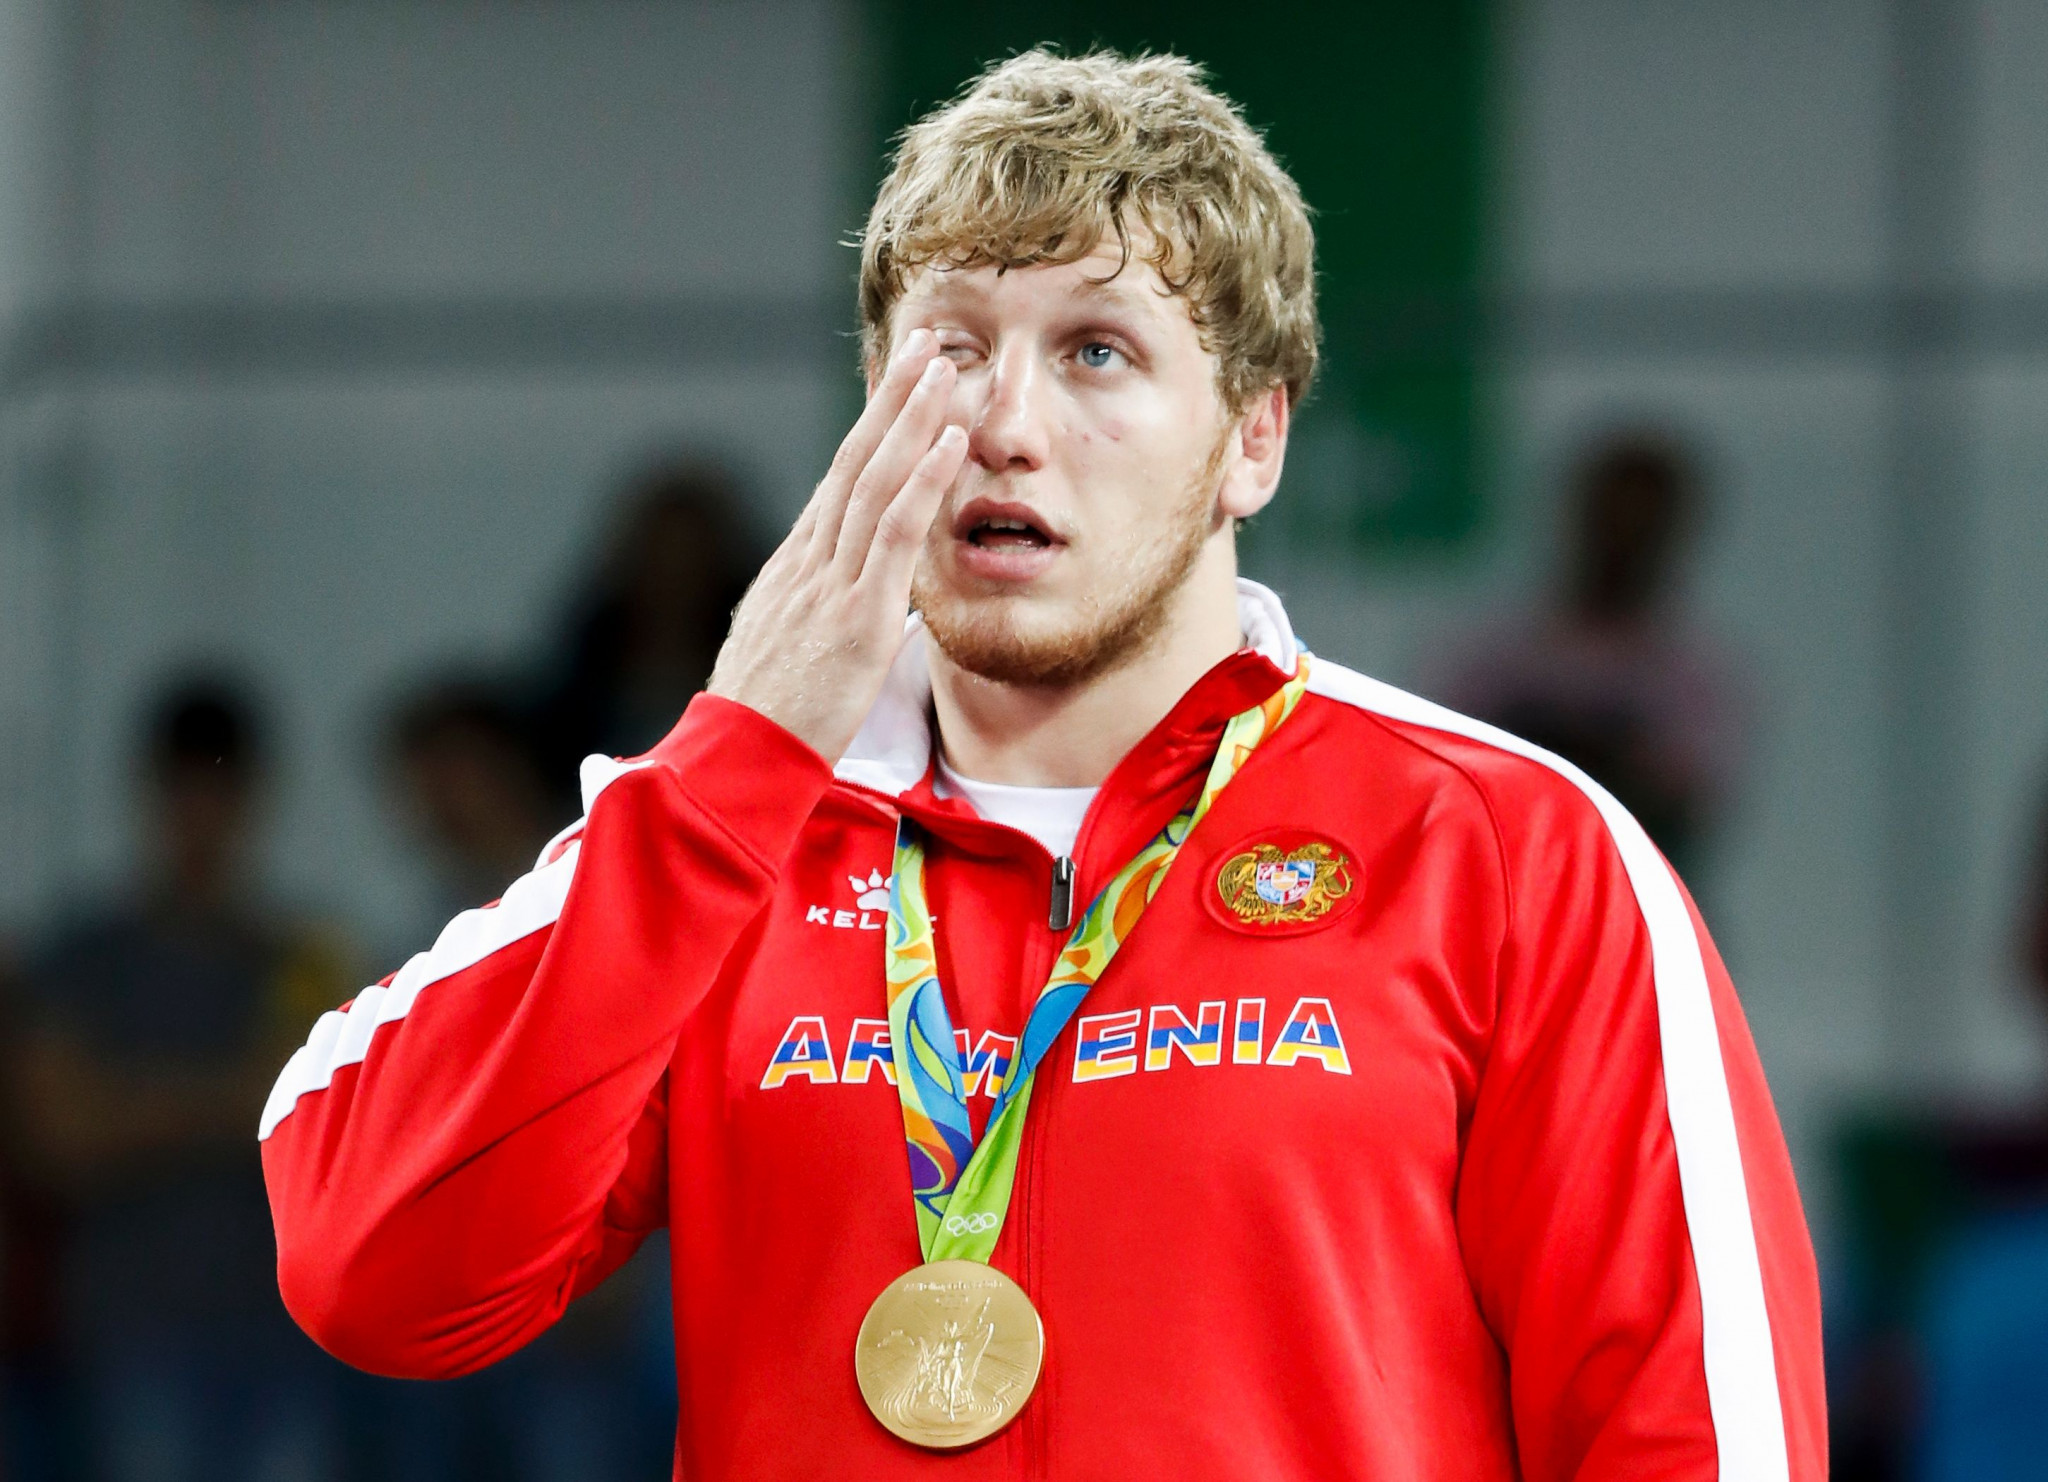 Artur Aleksanyan is one of several Olympic medallists competing in Kaspiysk ©Getty Images